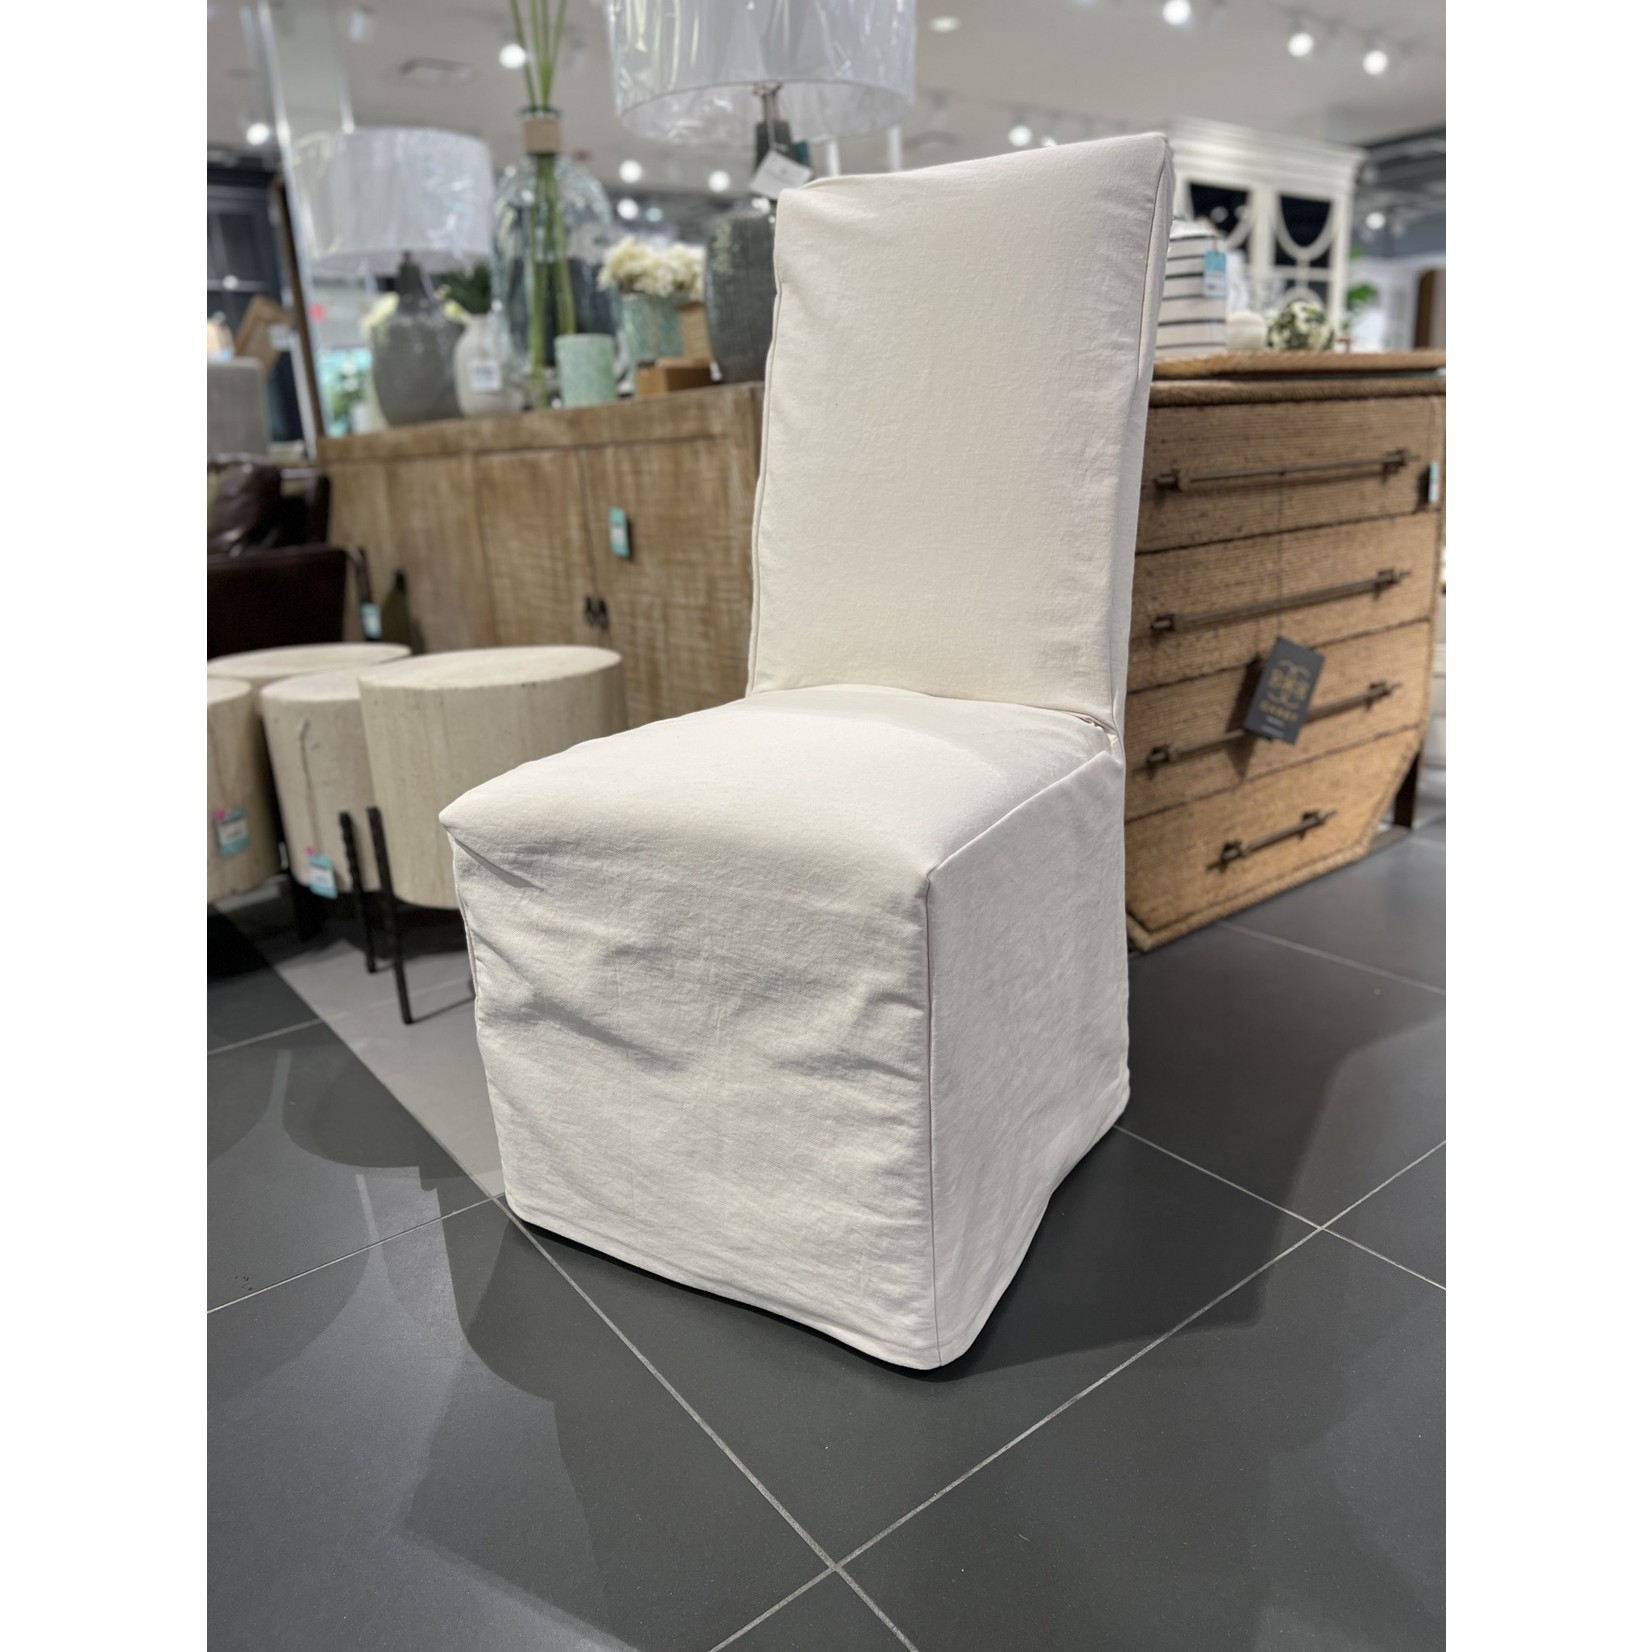 Outside The Box Natural Performance Fabric Slip Cover Dining Chair